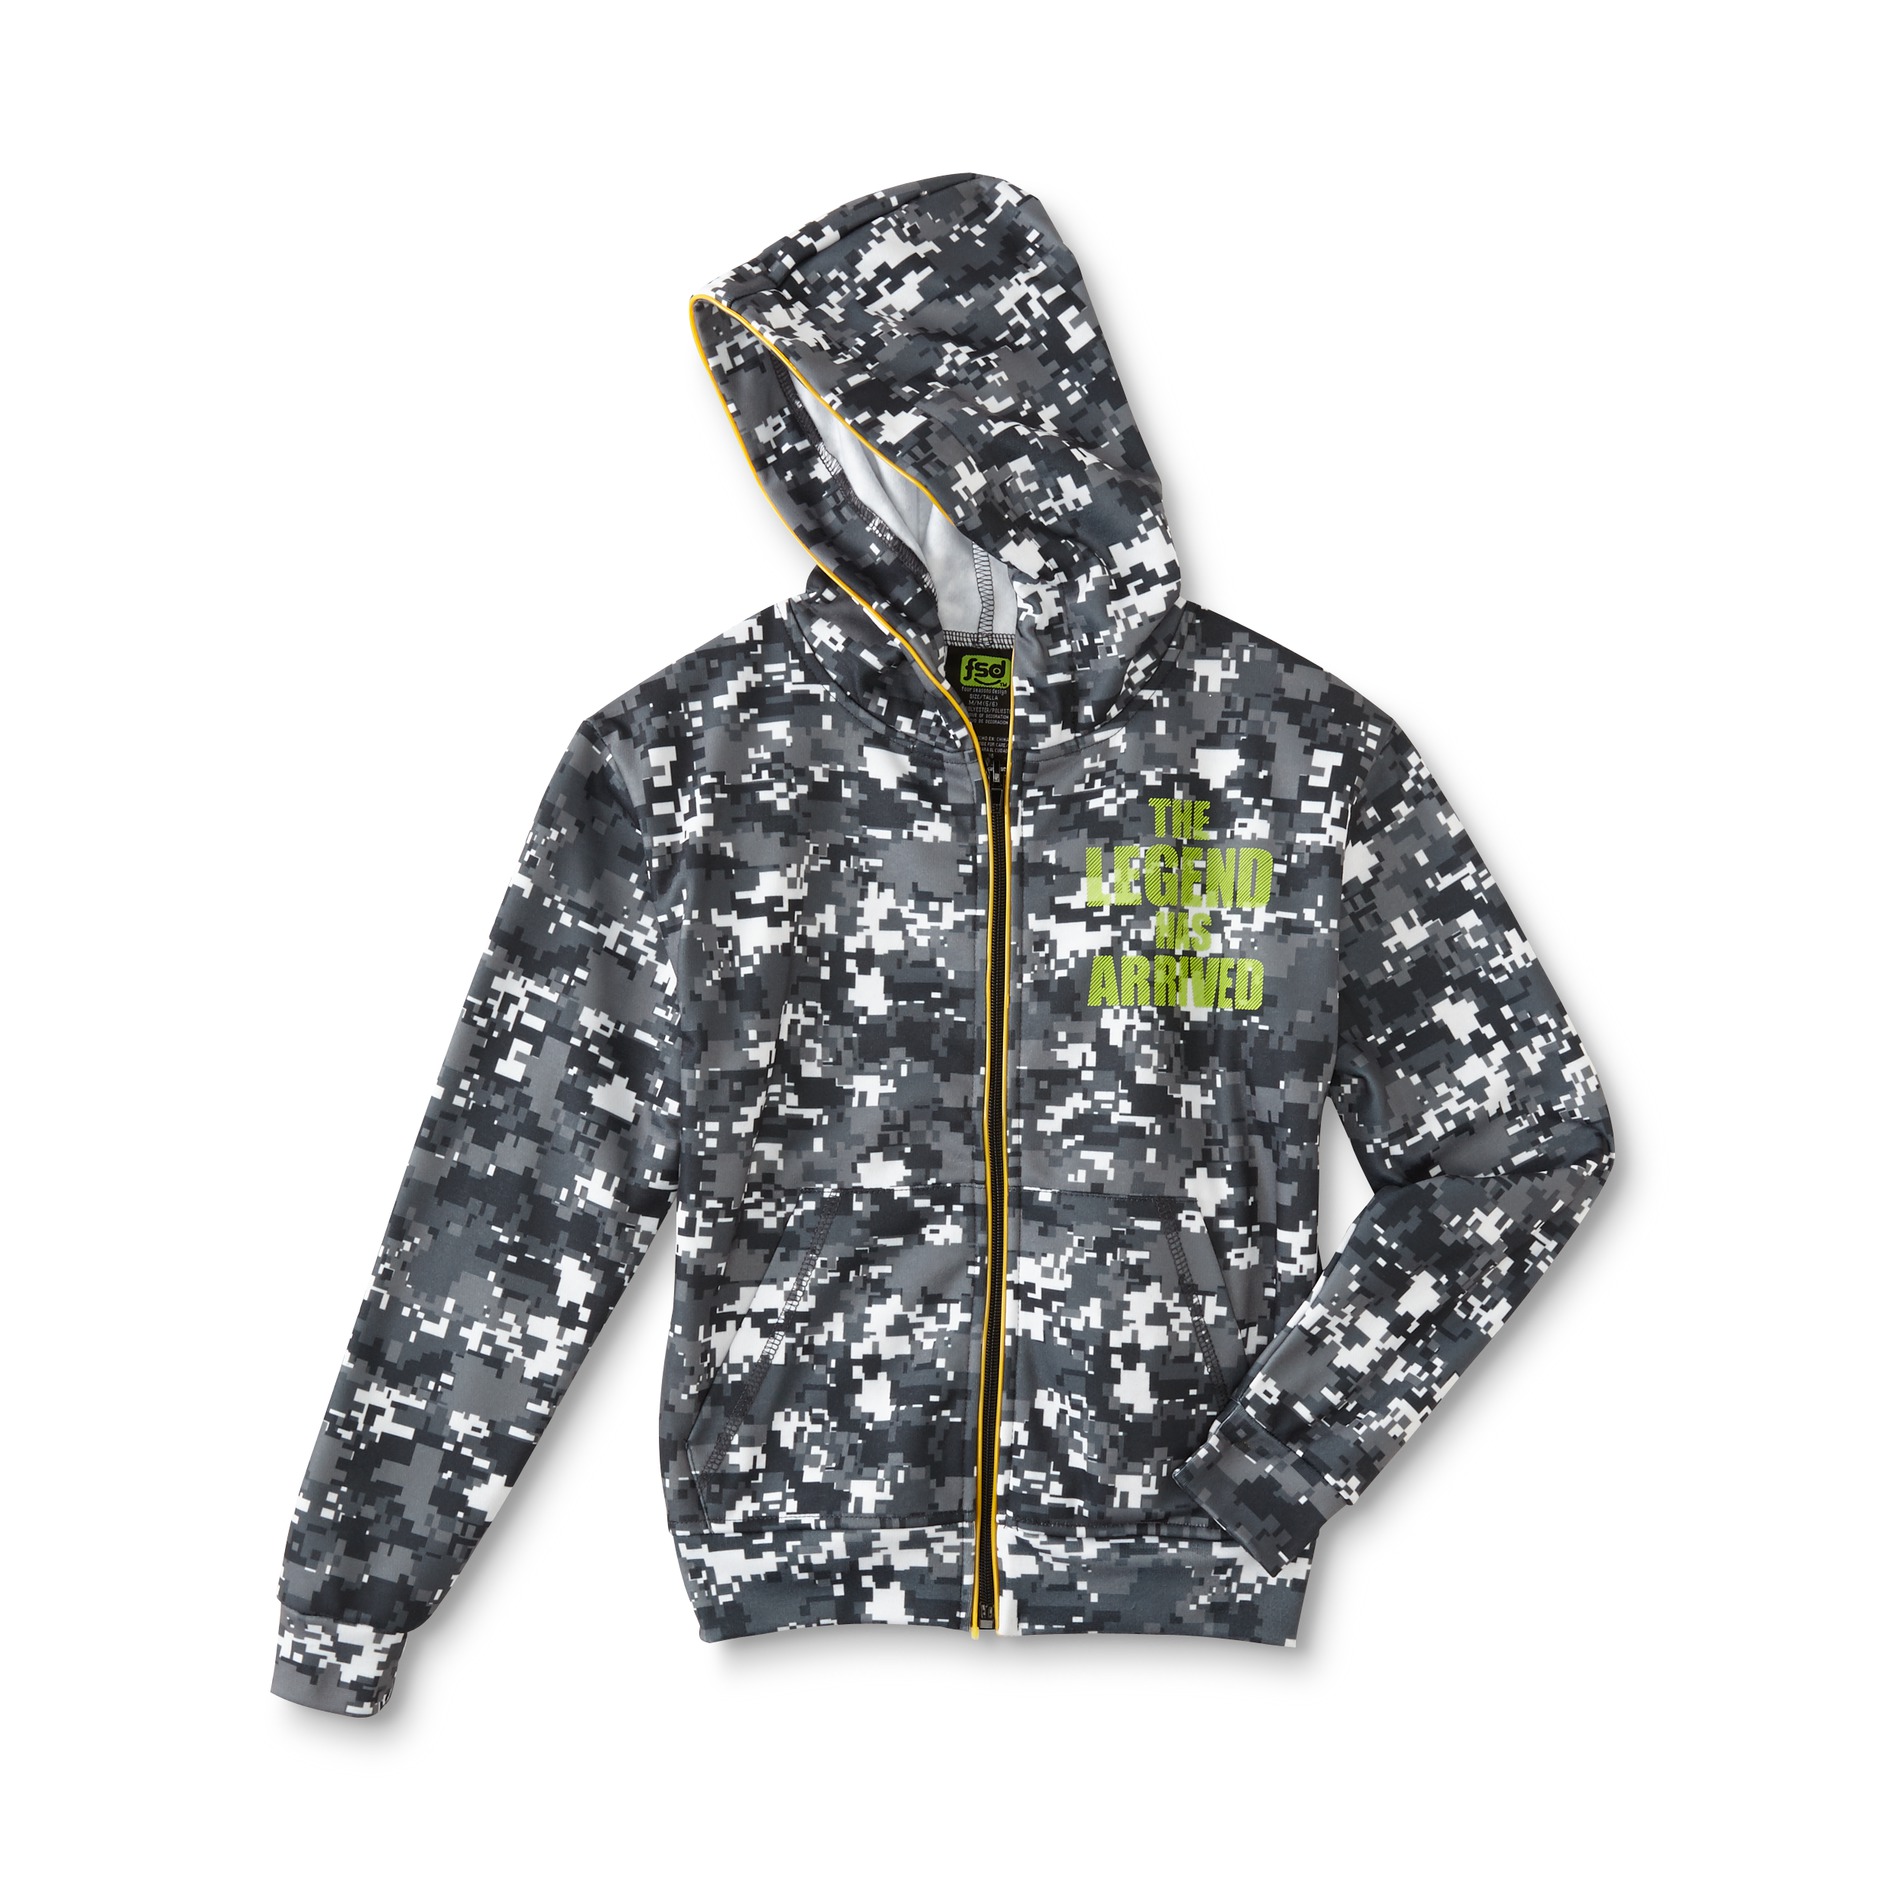 5Star Boys' Light-Up Hoodie Jacket - Camouflage